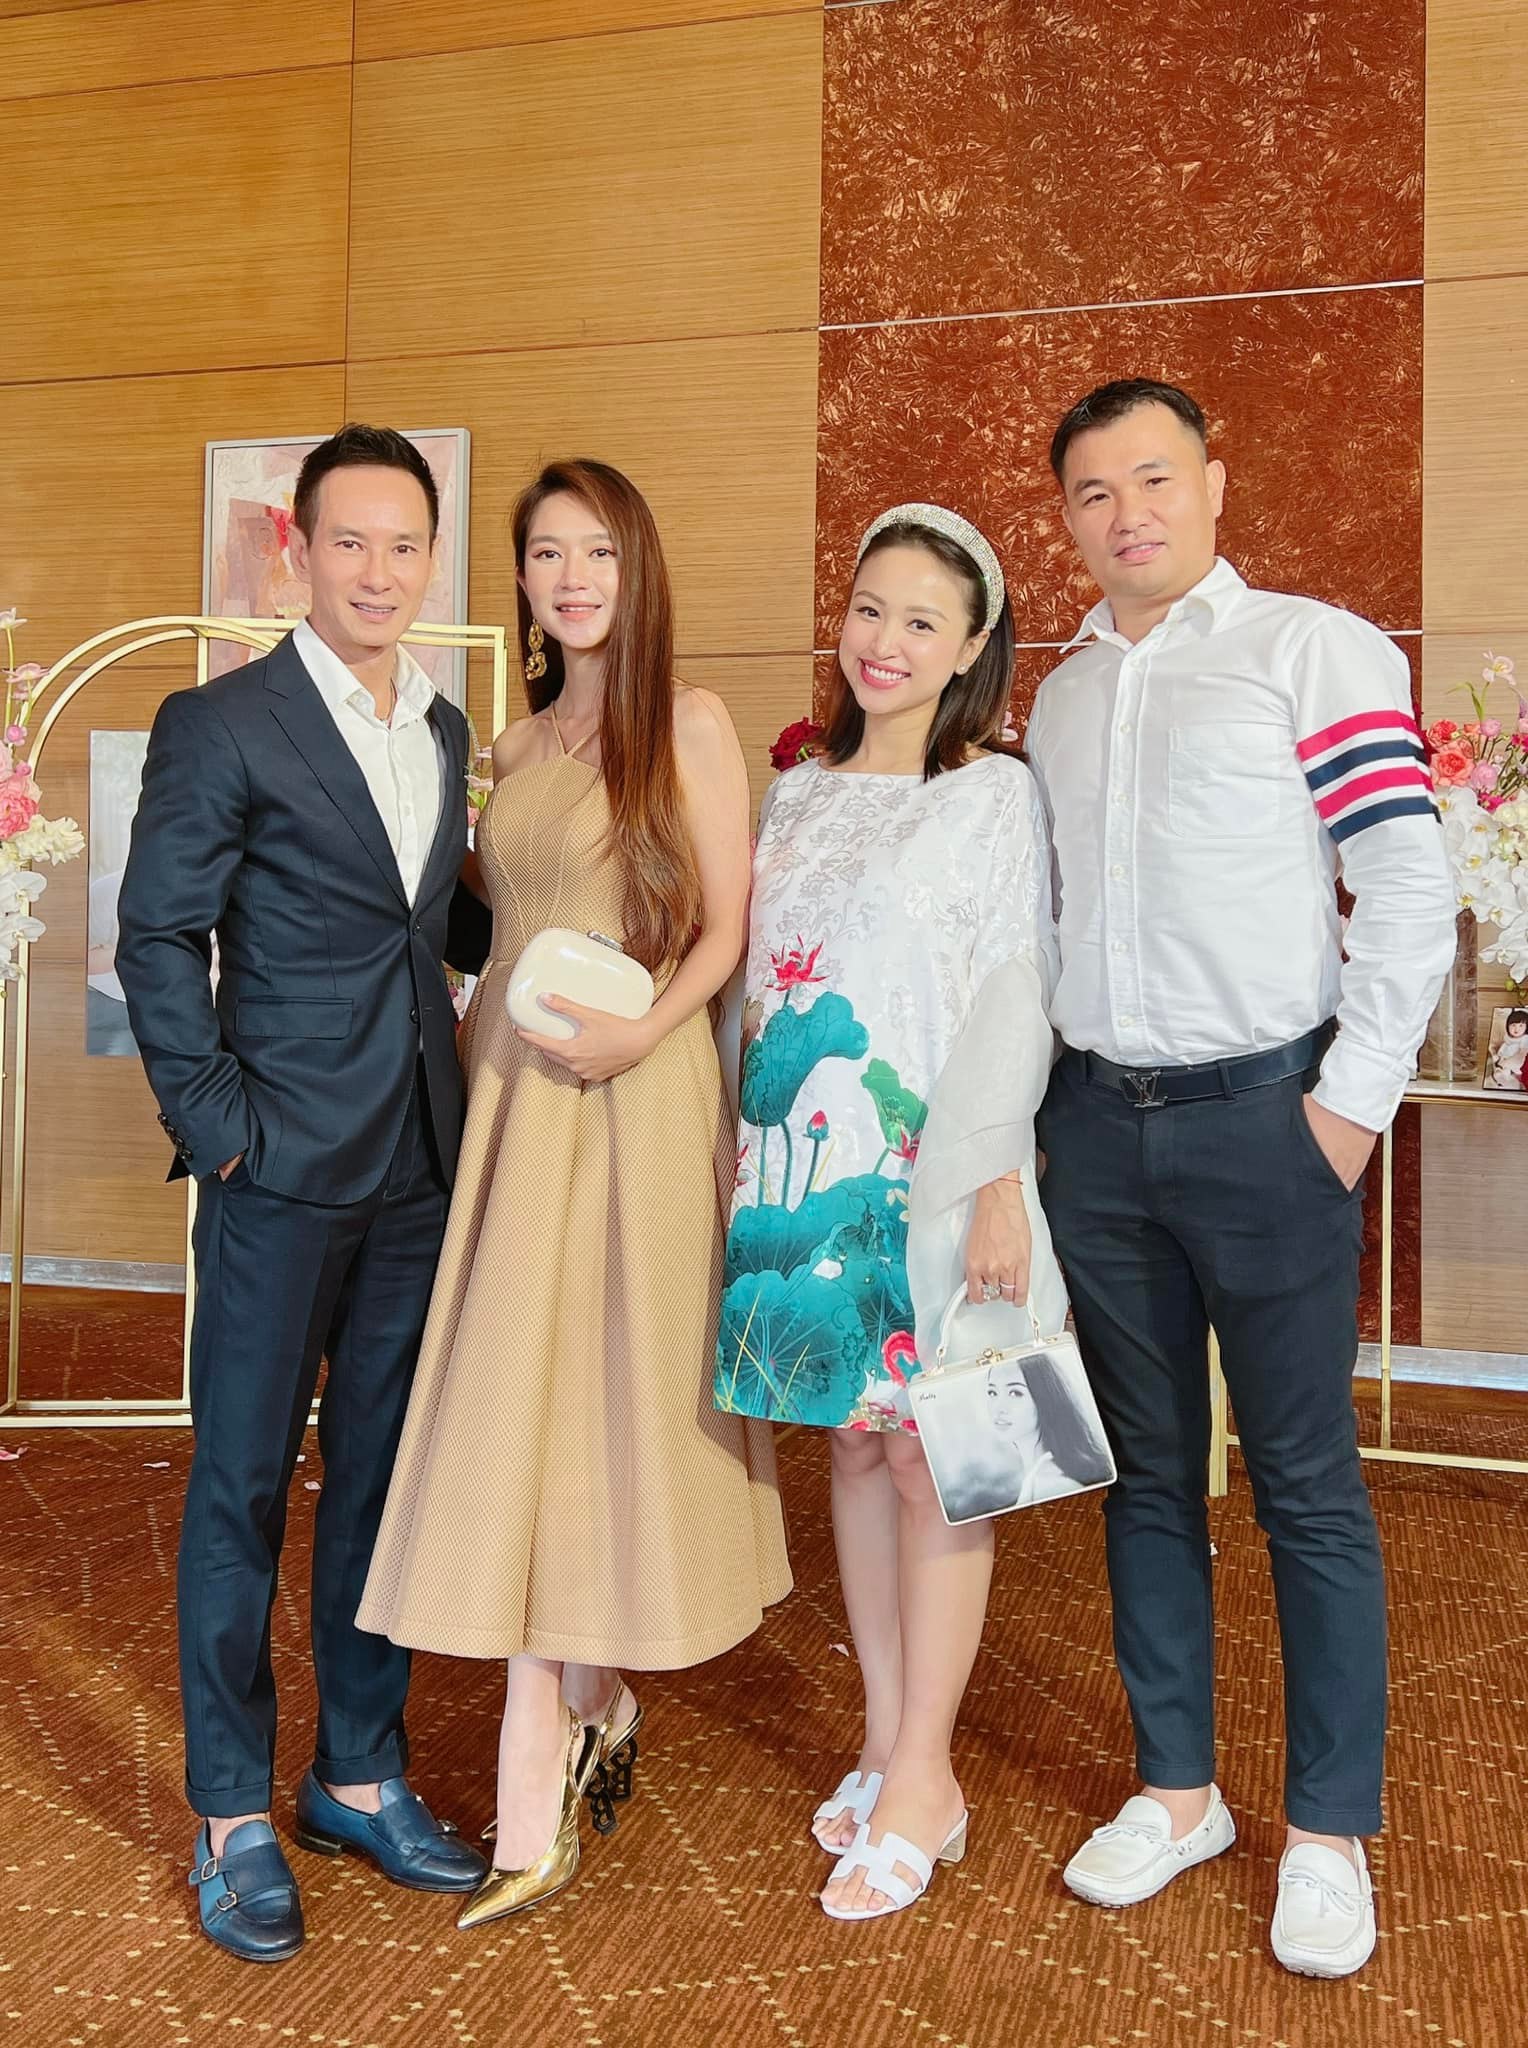 Wedding with all-star Vbiz guests: Ly Hai - Minh Ha loving couple, Thanh Van Hugo showing off her pregnant figure - Photo 4.